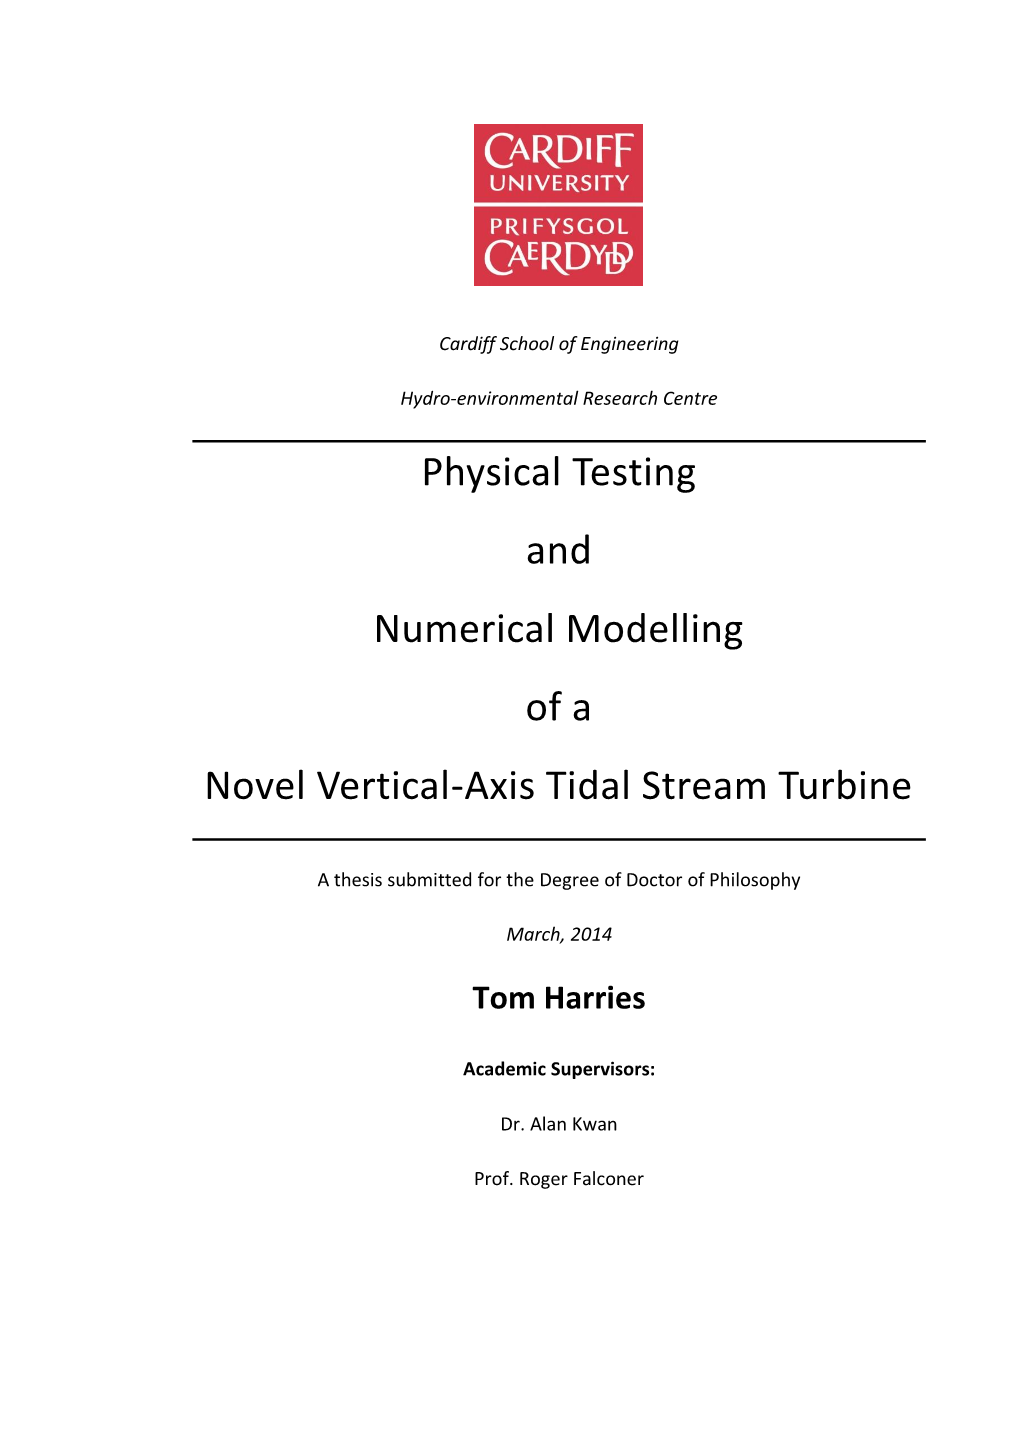 Physical Testing and Numerical Modelling of a Novel Vertical-Axis Tidal Stream Turbine